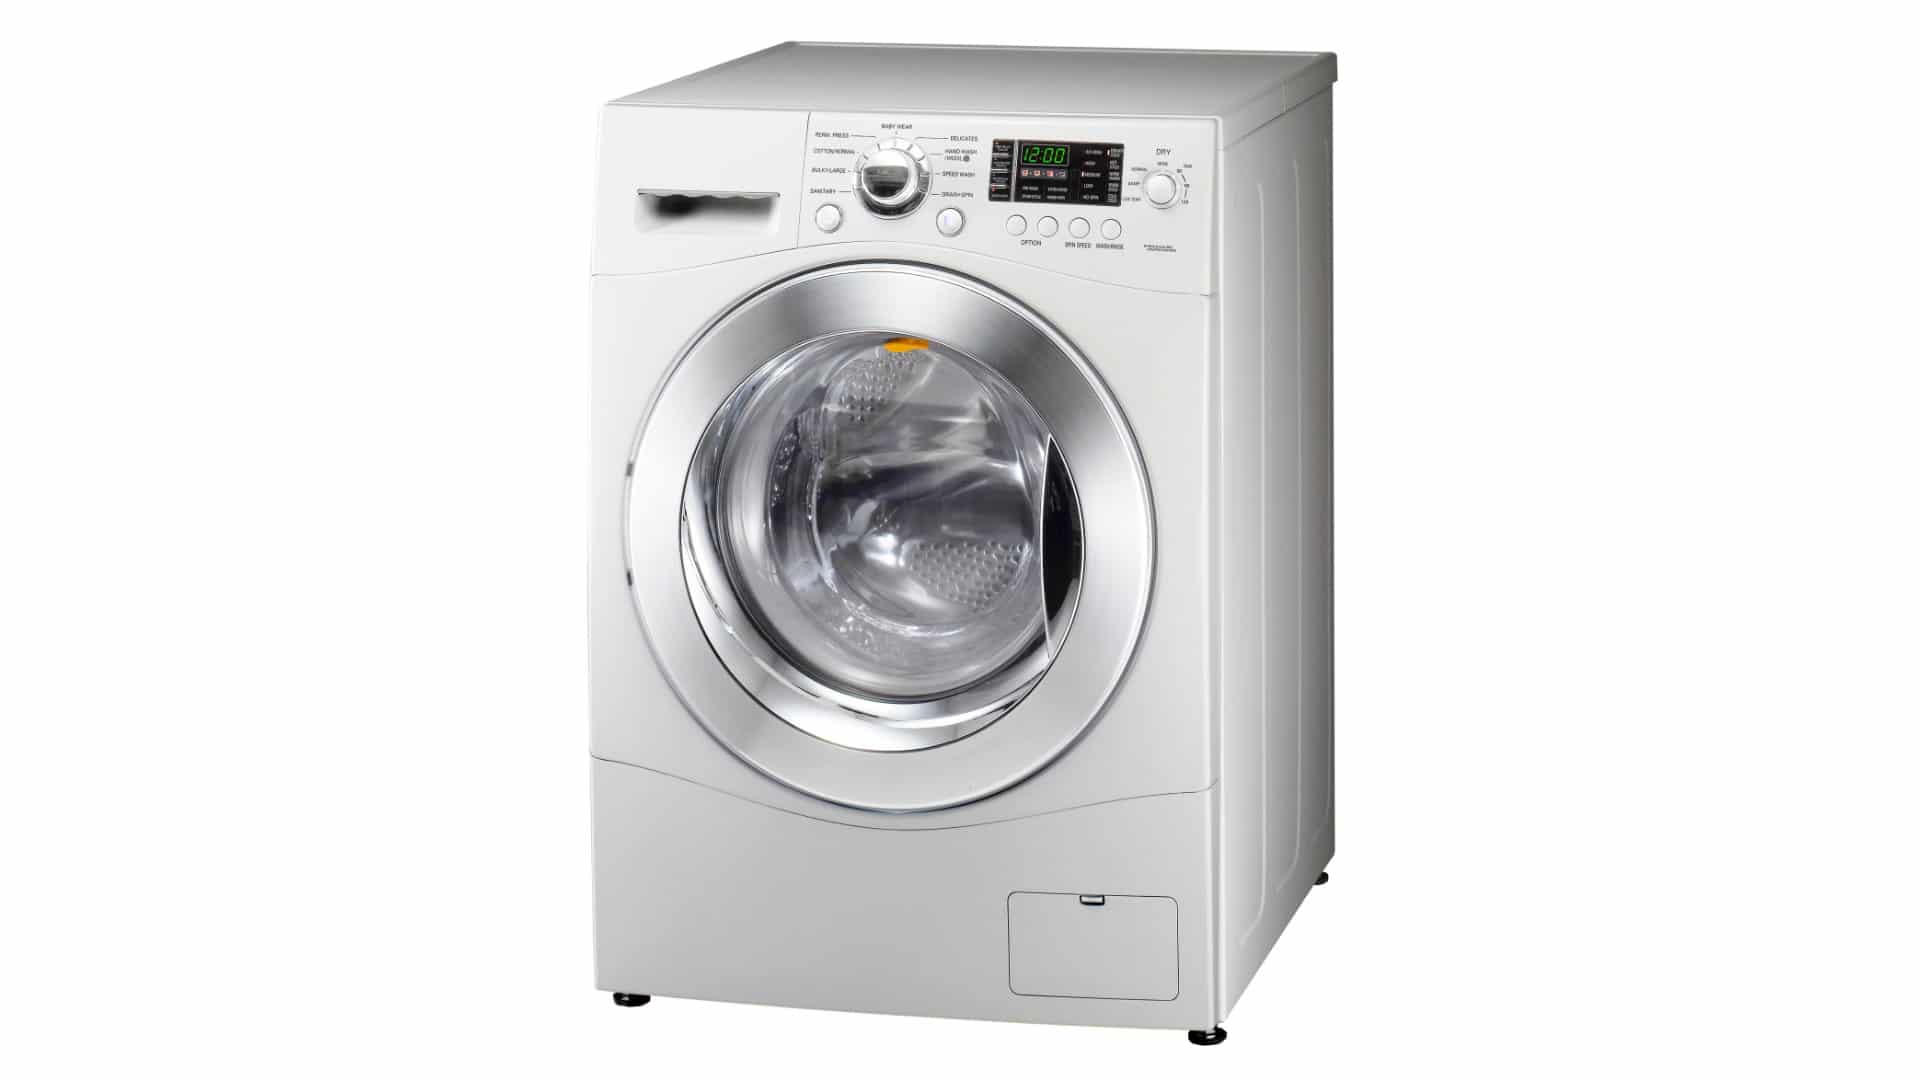 How To Fix The Error Code F46 For Whirlpool Washer